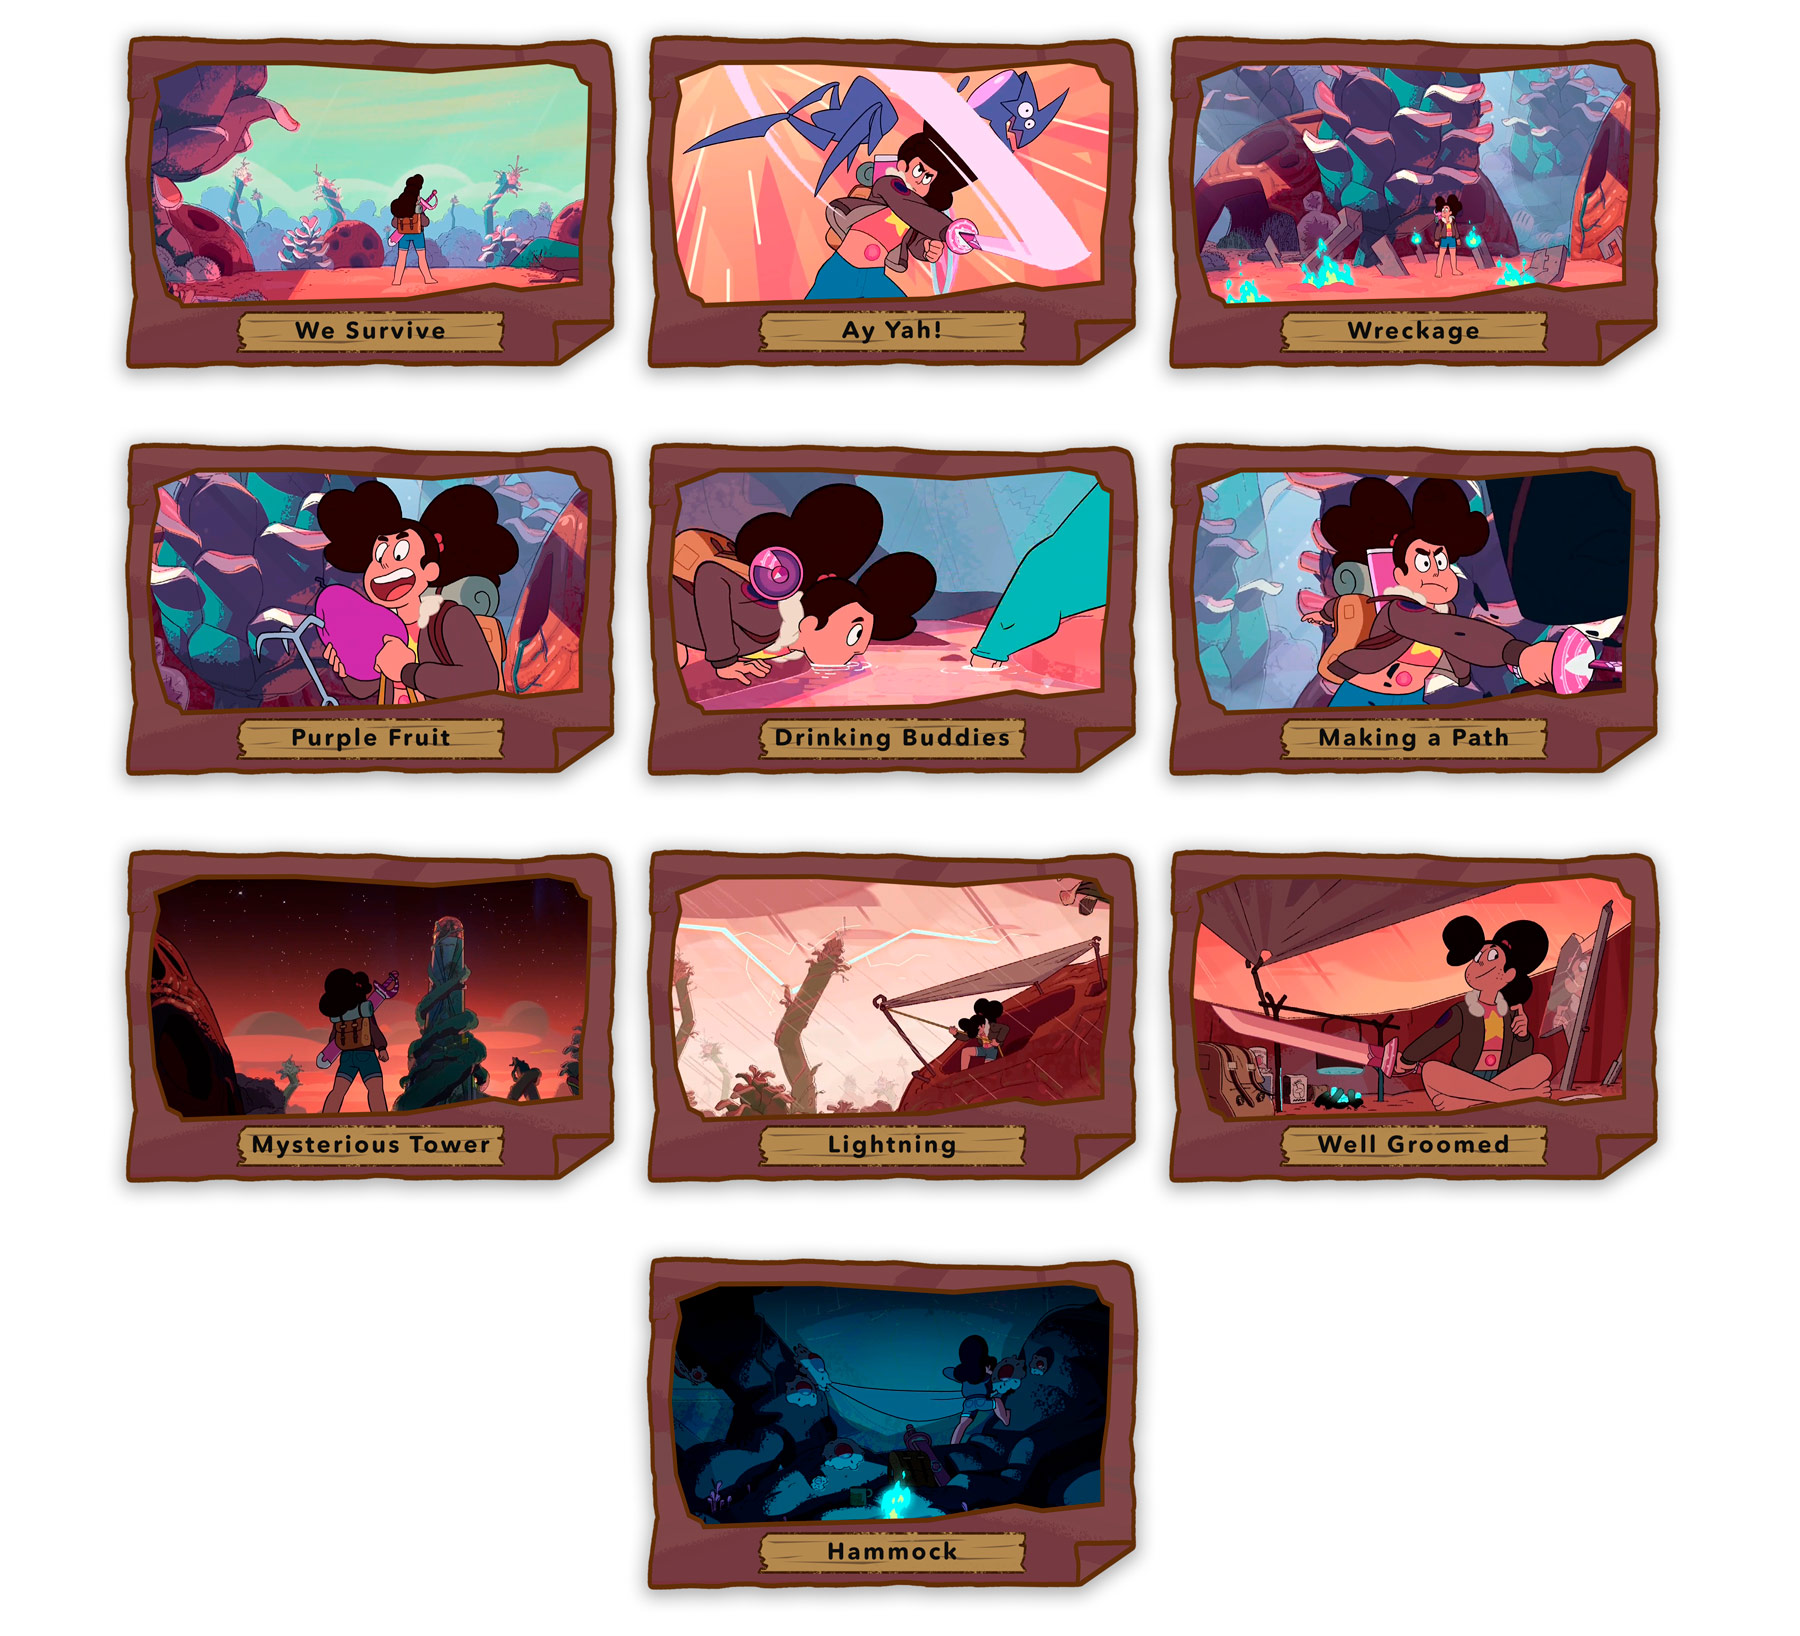 Image of 10 card fronts from the Stevonnie Survival card set.